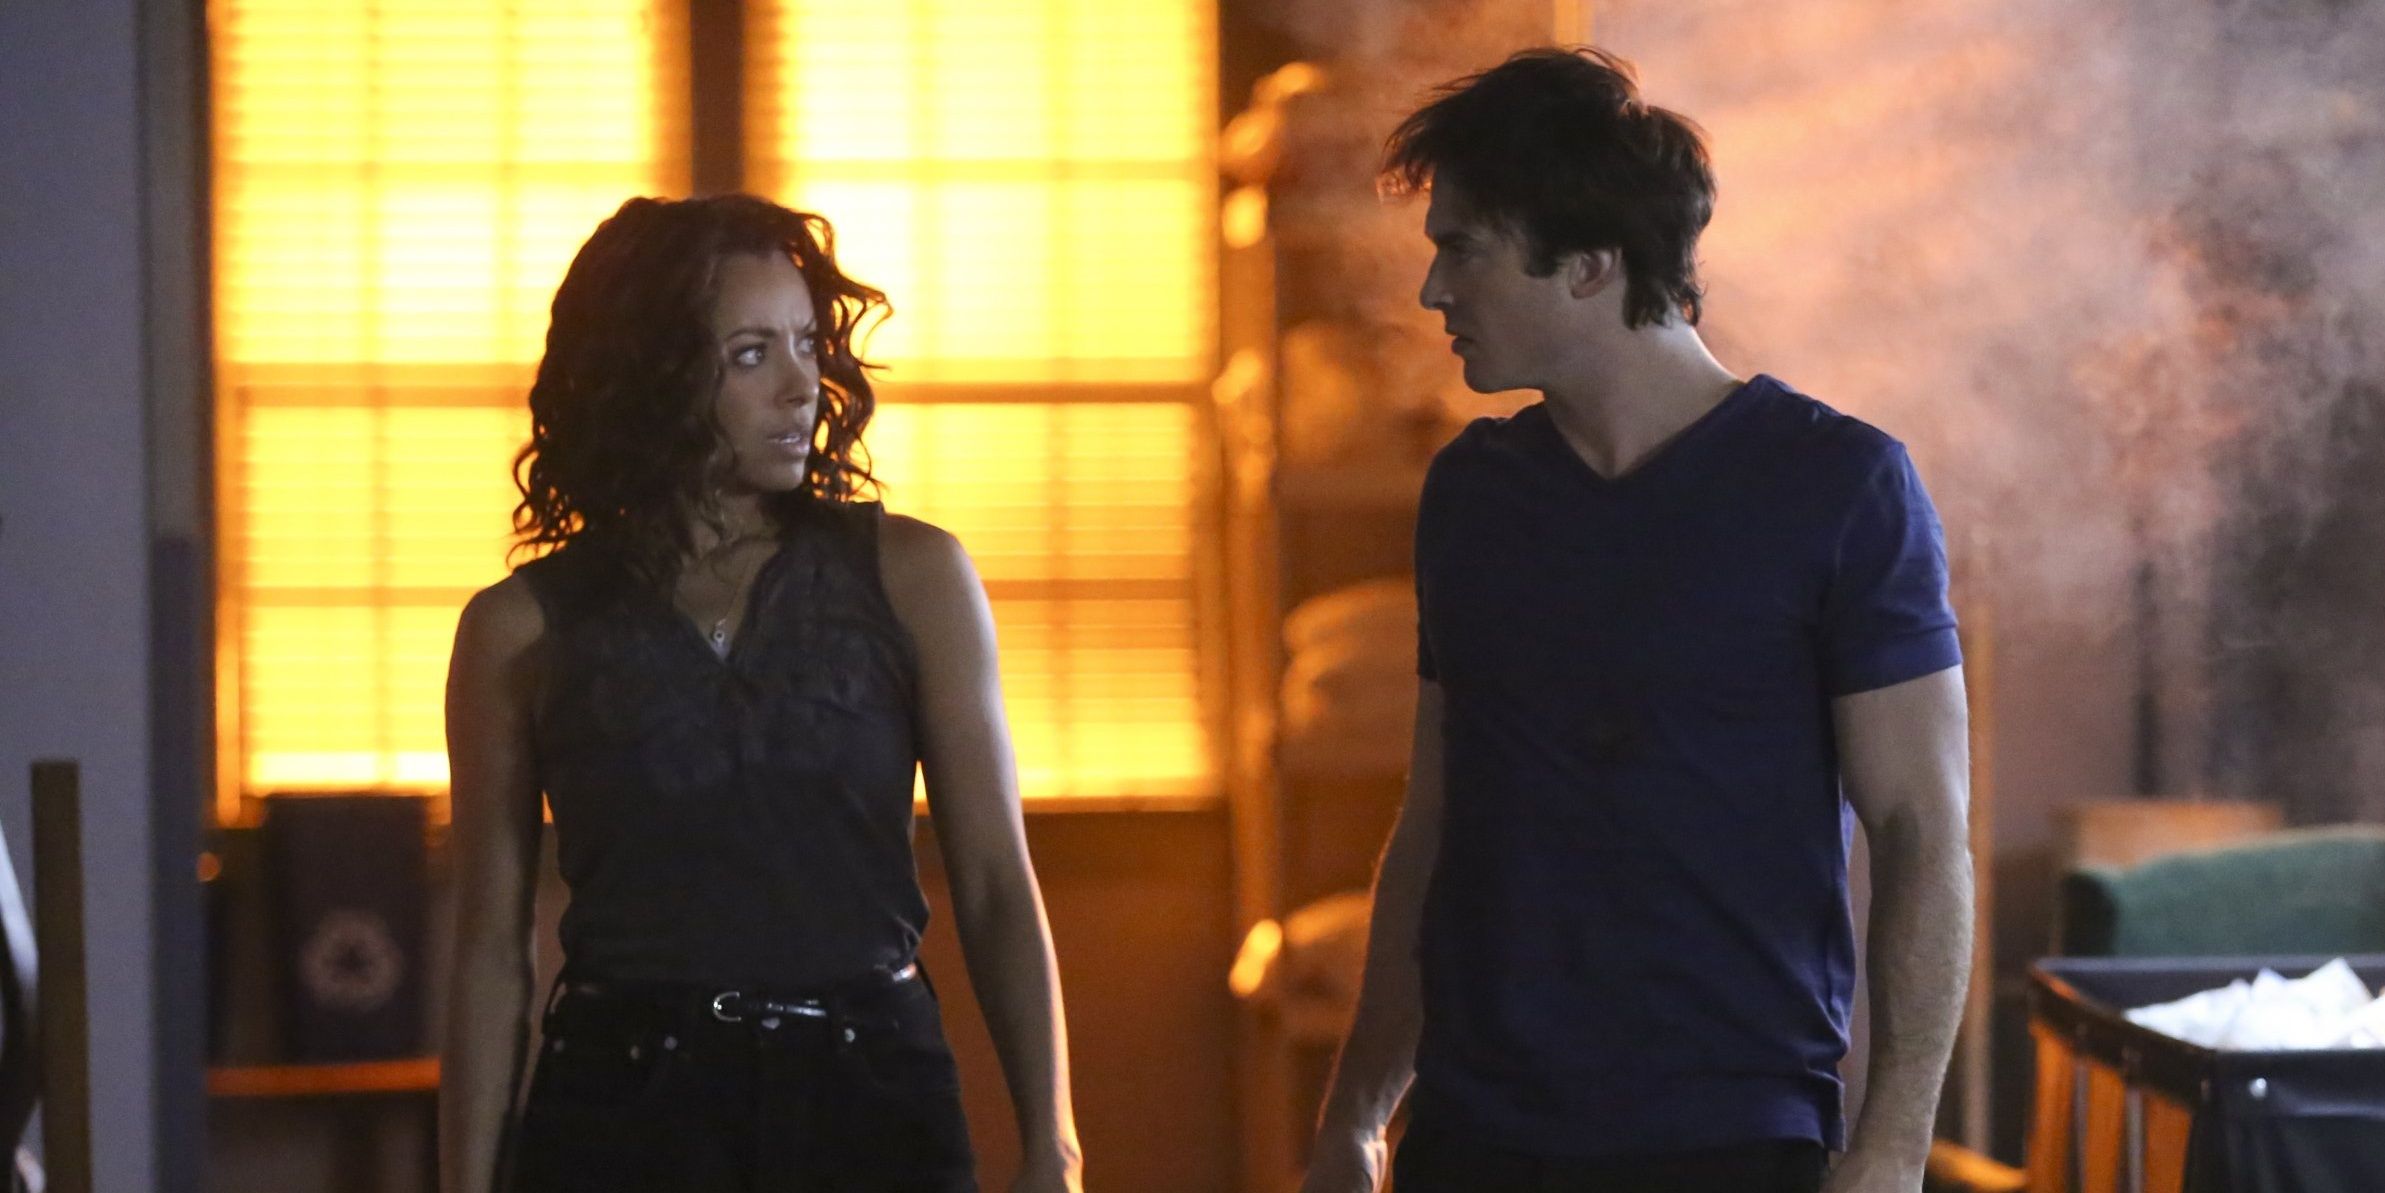 Bonnie and Damon walking next to each other in The Vampire Diaries.